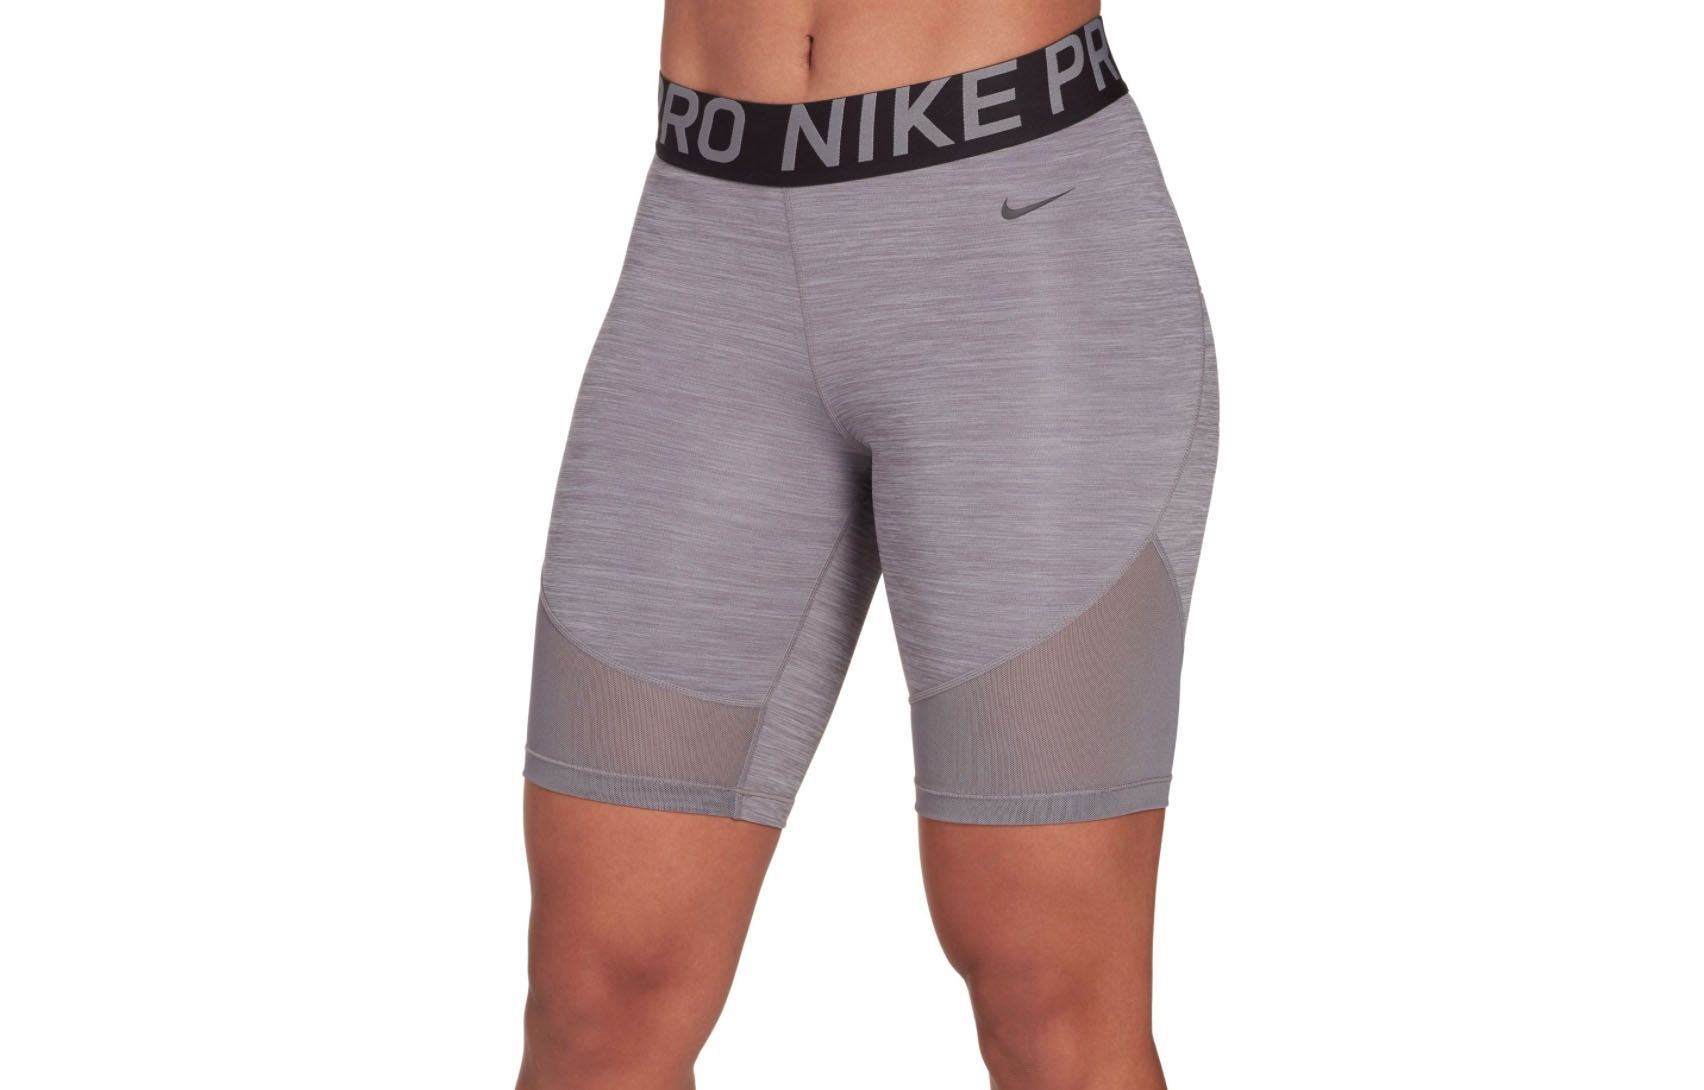 nike women's compression shorts 8 inch